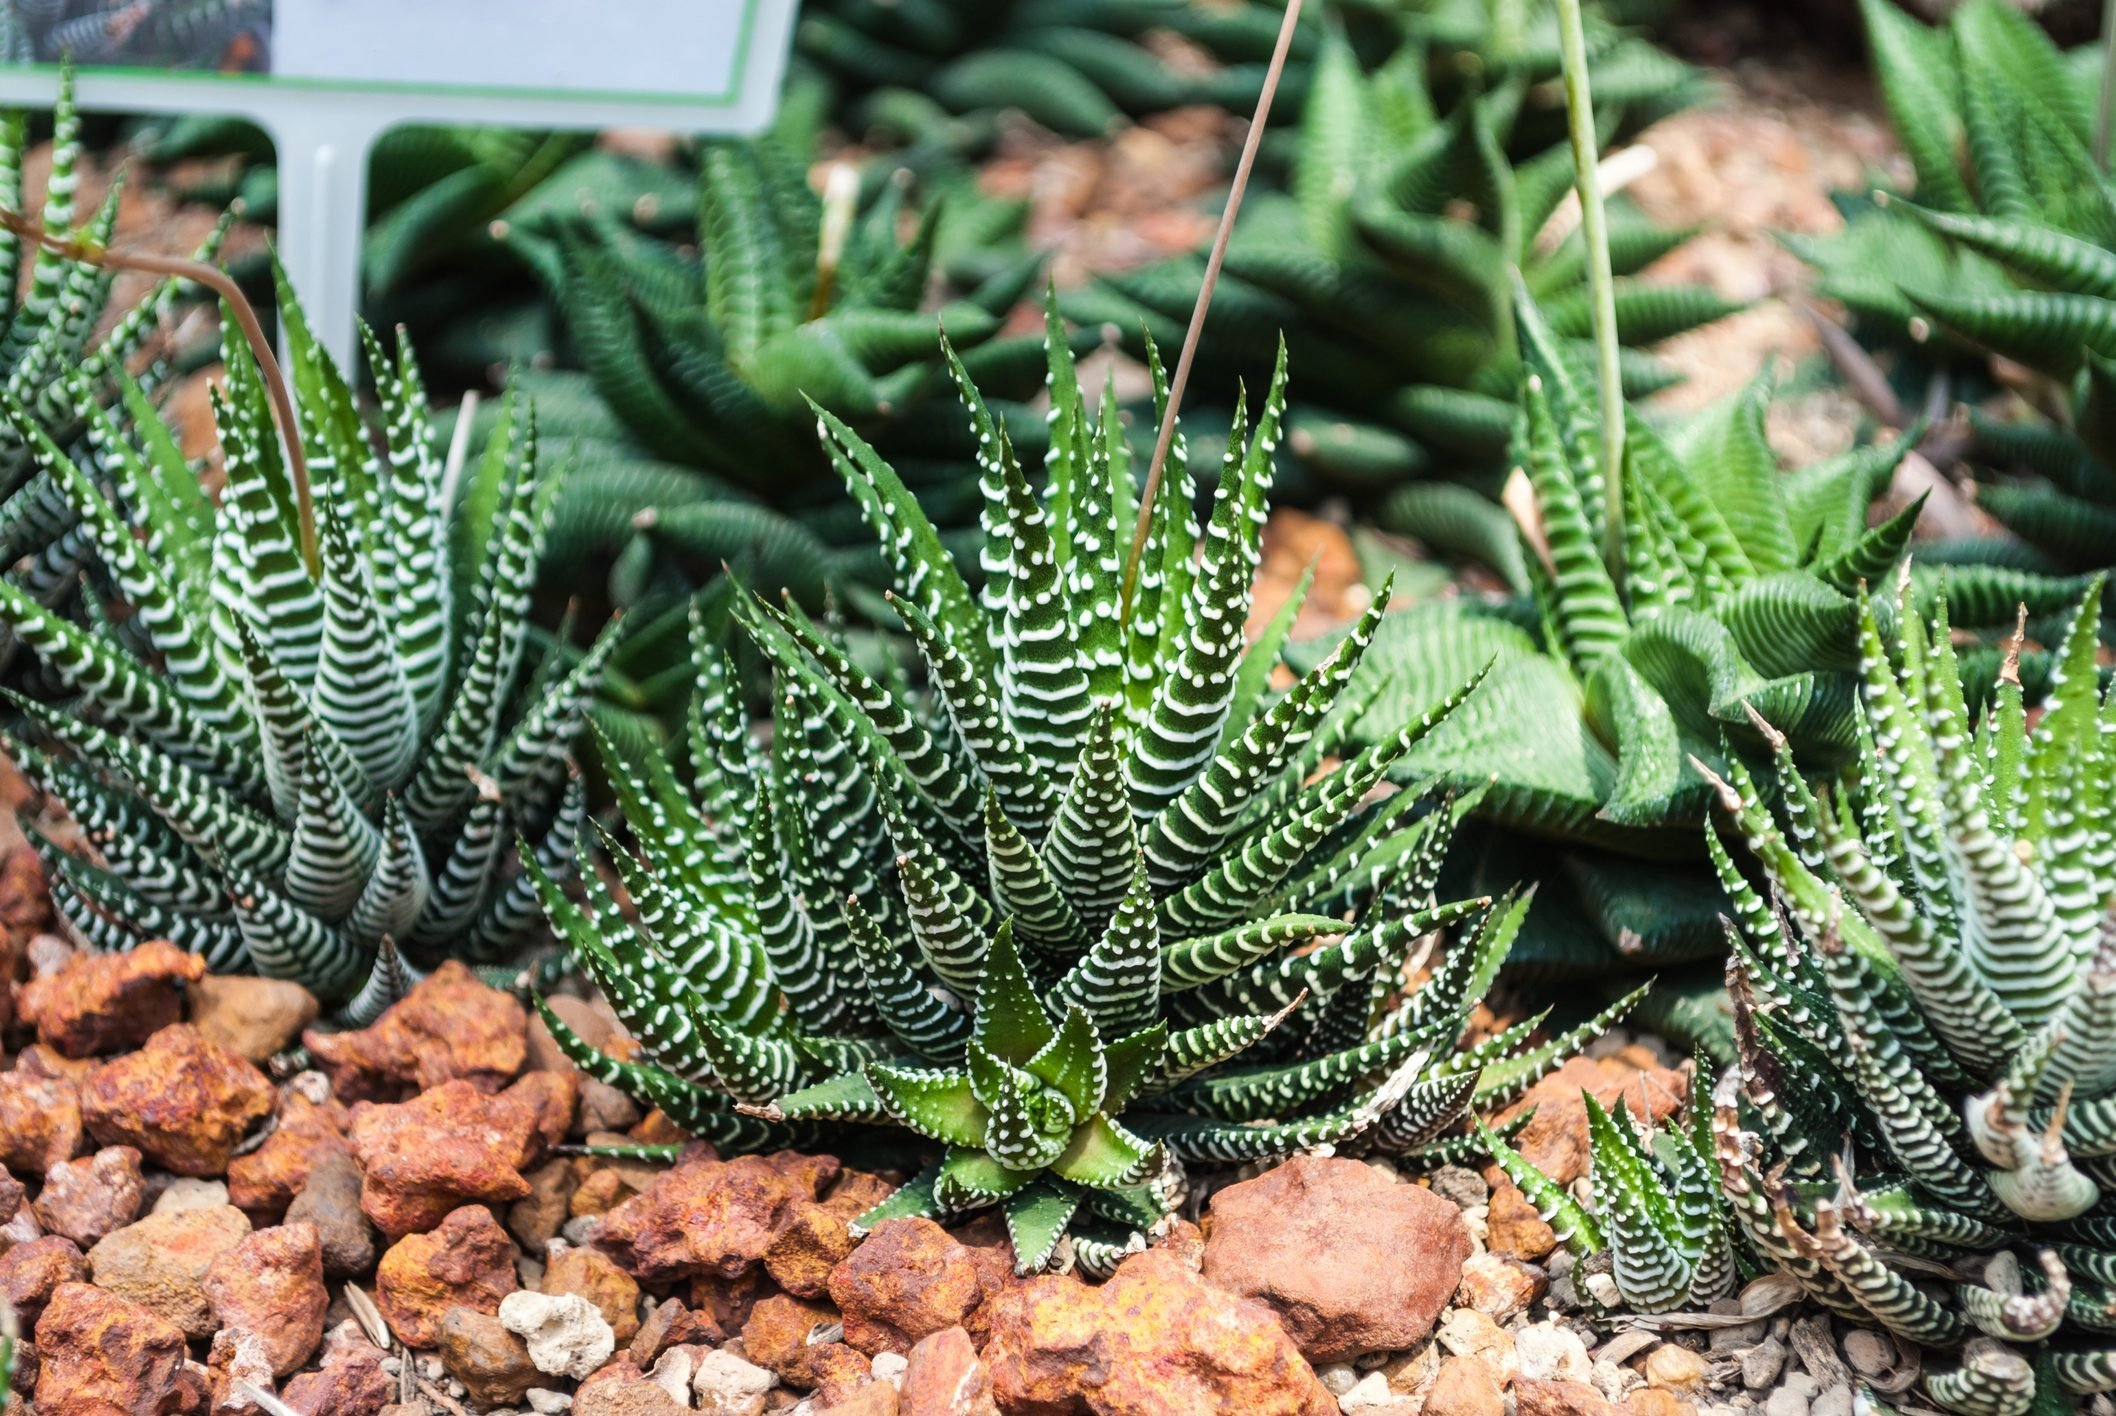 Add Haworthia, or Zebra Plant, to Your Succulent Collection